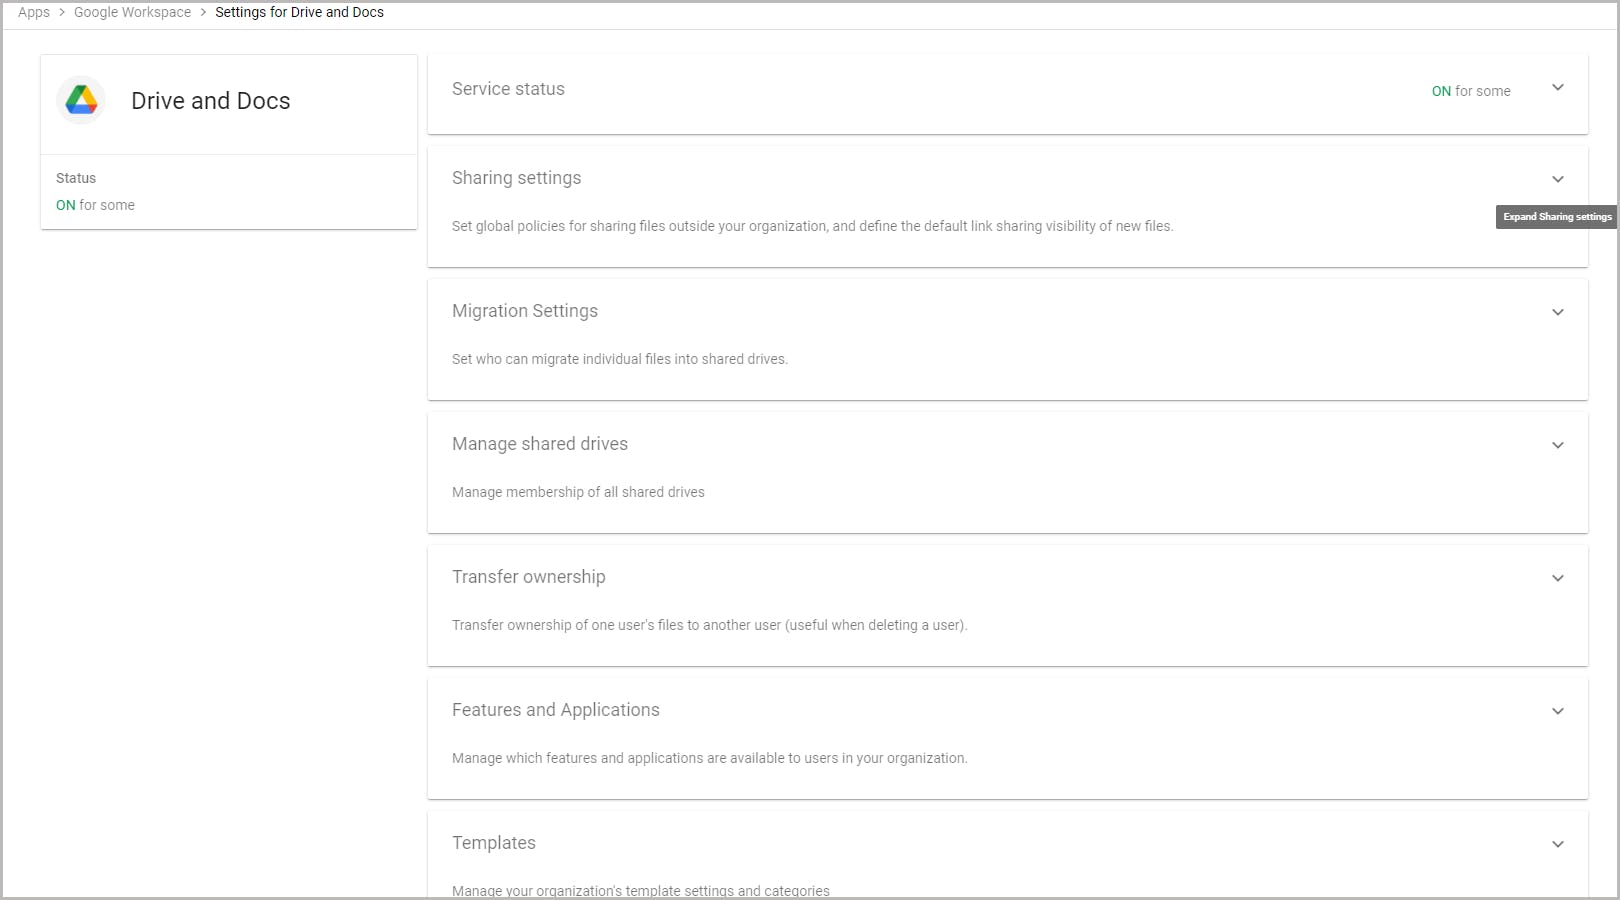 Change service settings for users